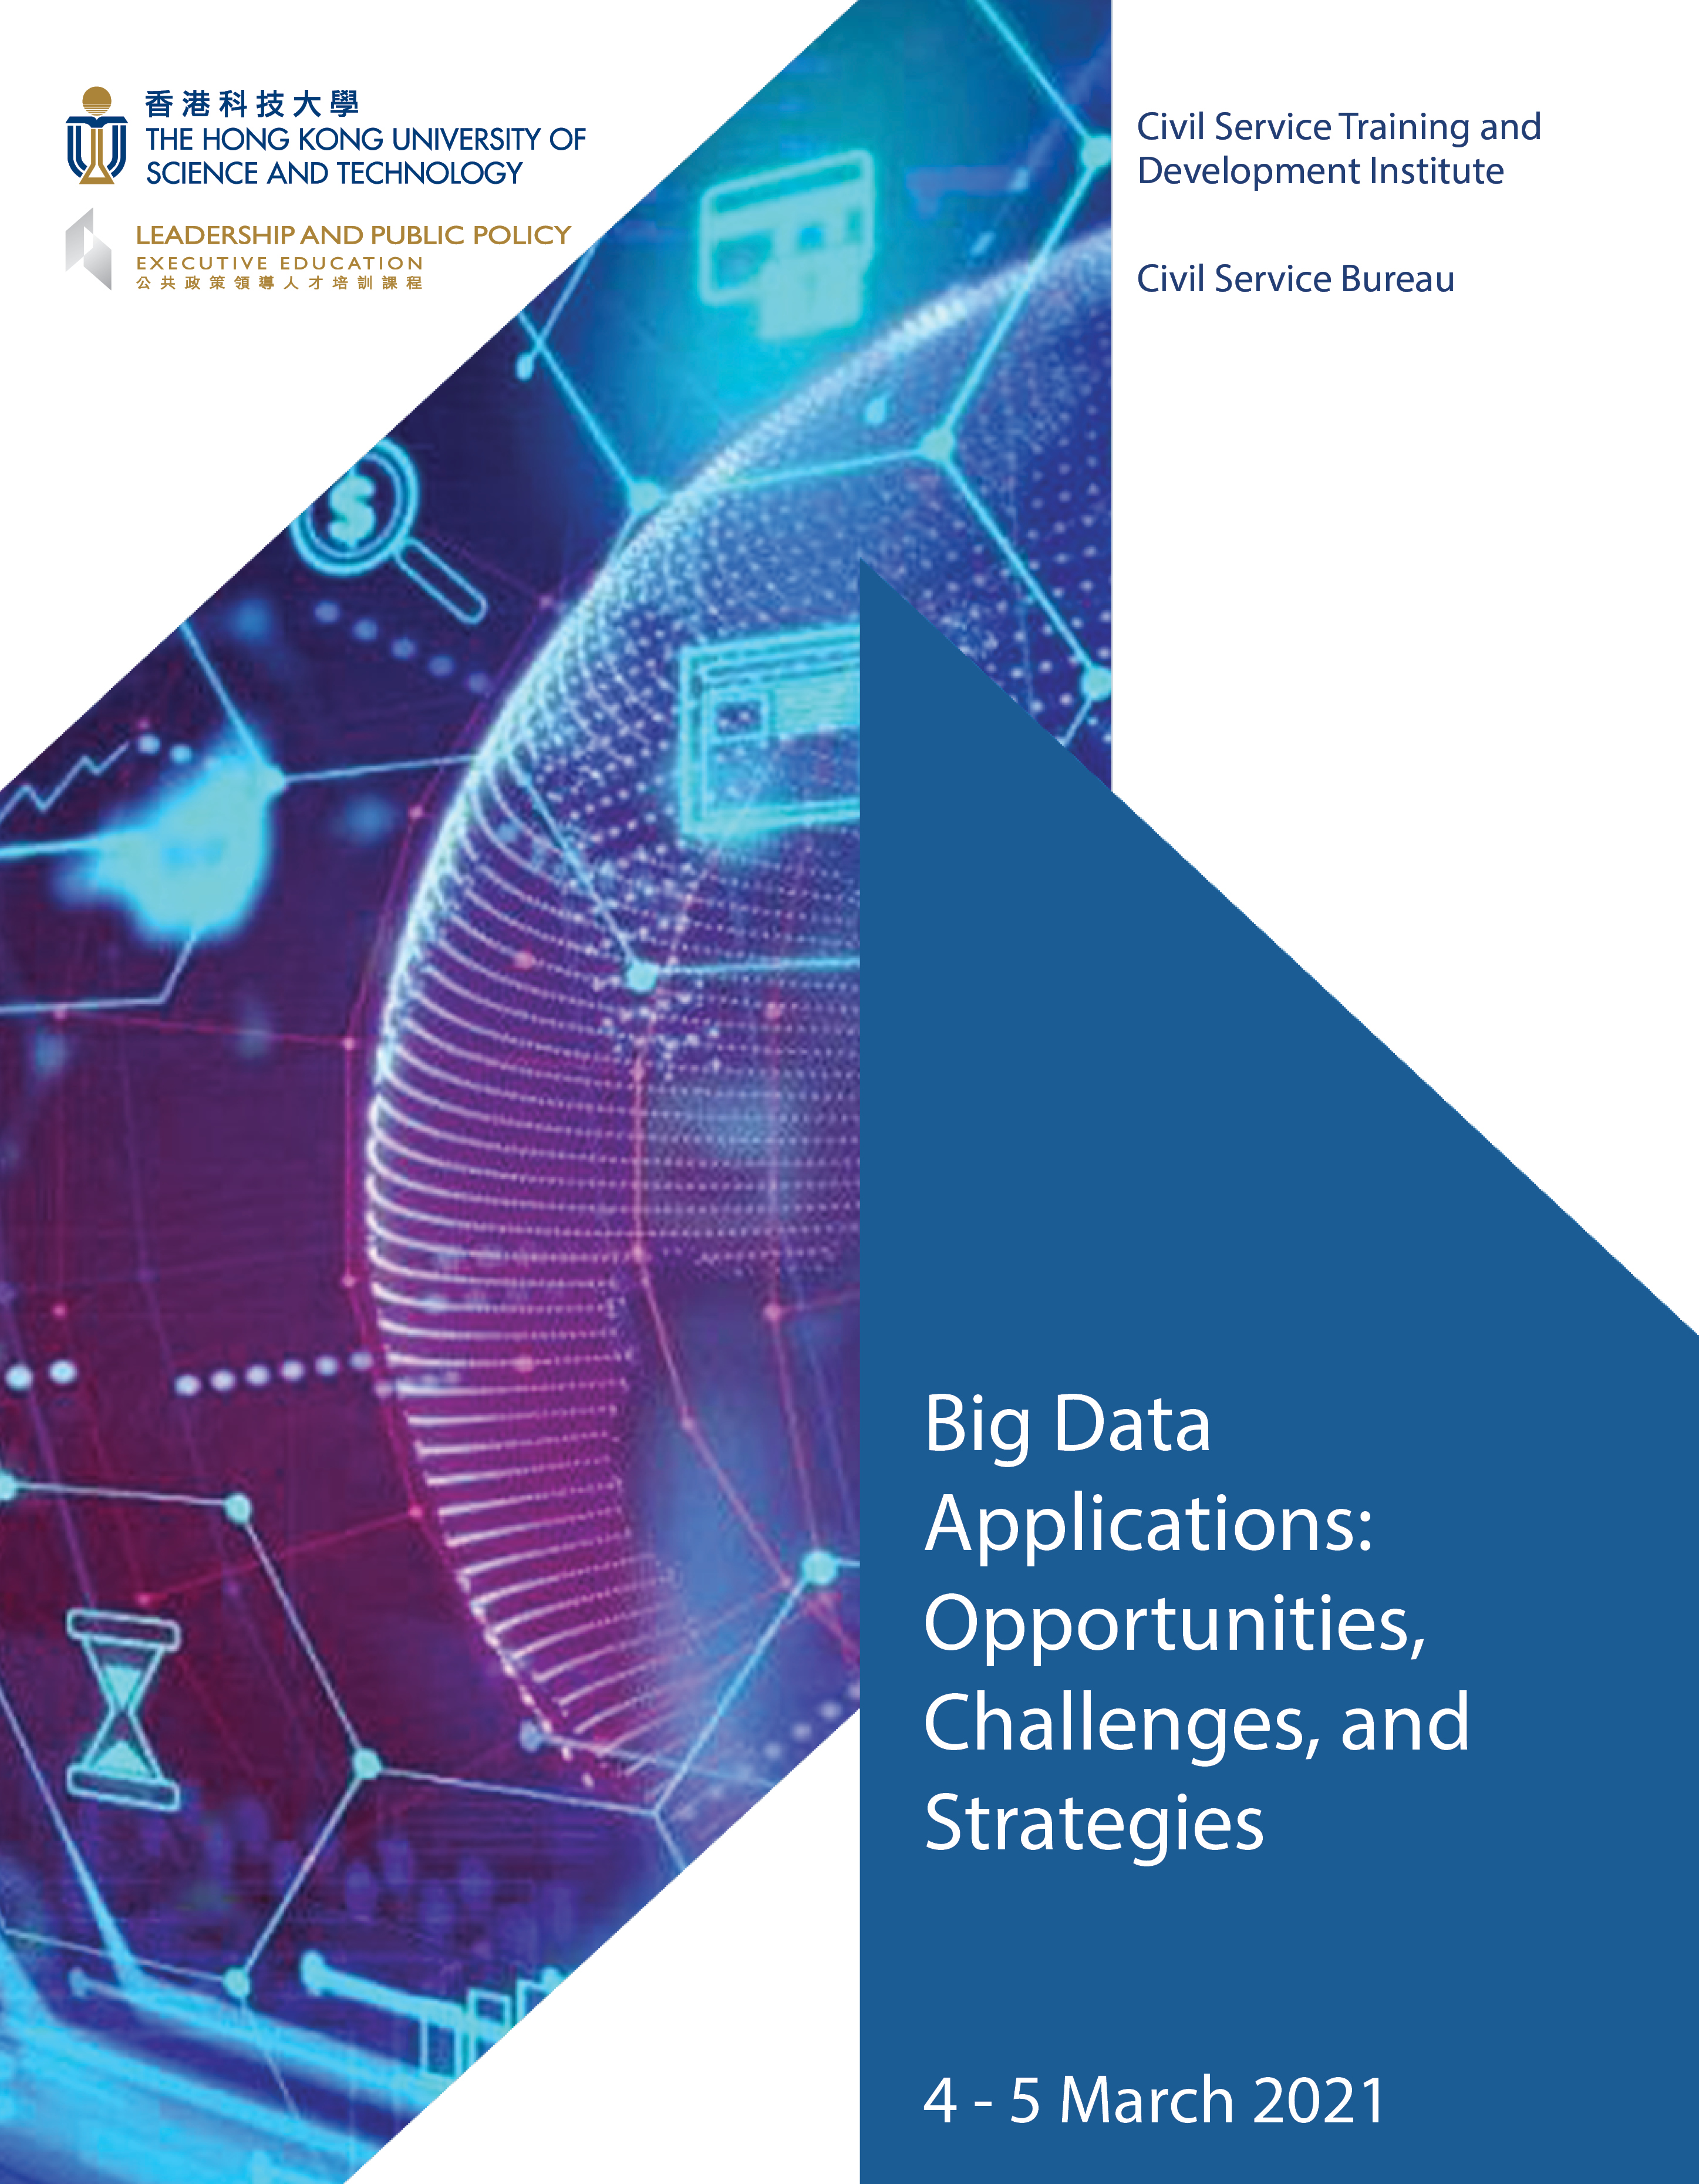 Big Data Applications: Opportunities, Challenges, and Strategies (4-5 Mar 2021)